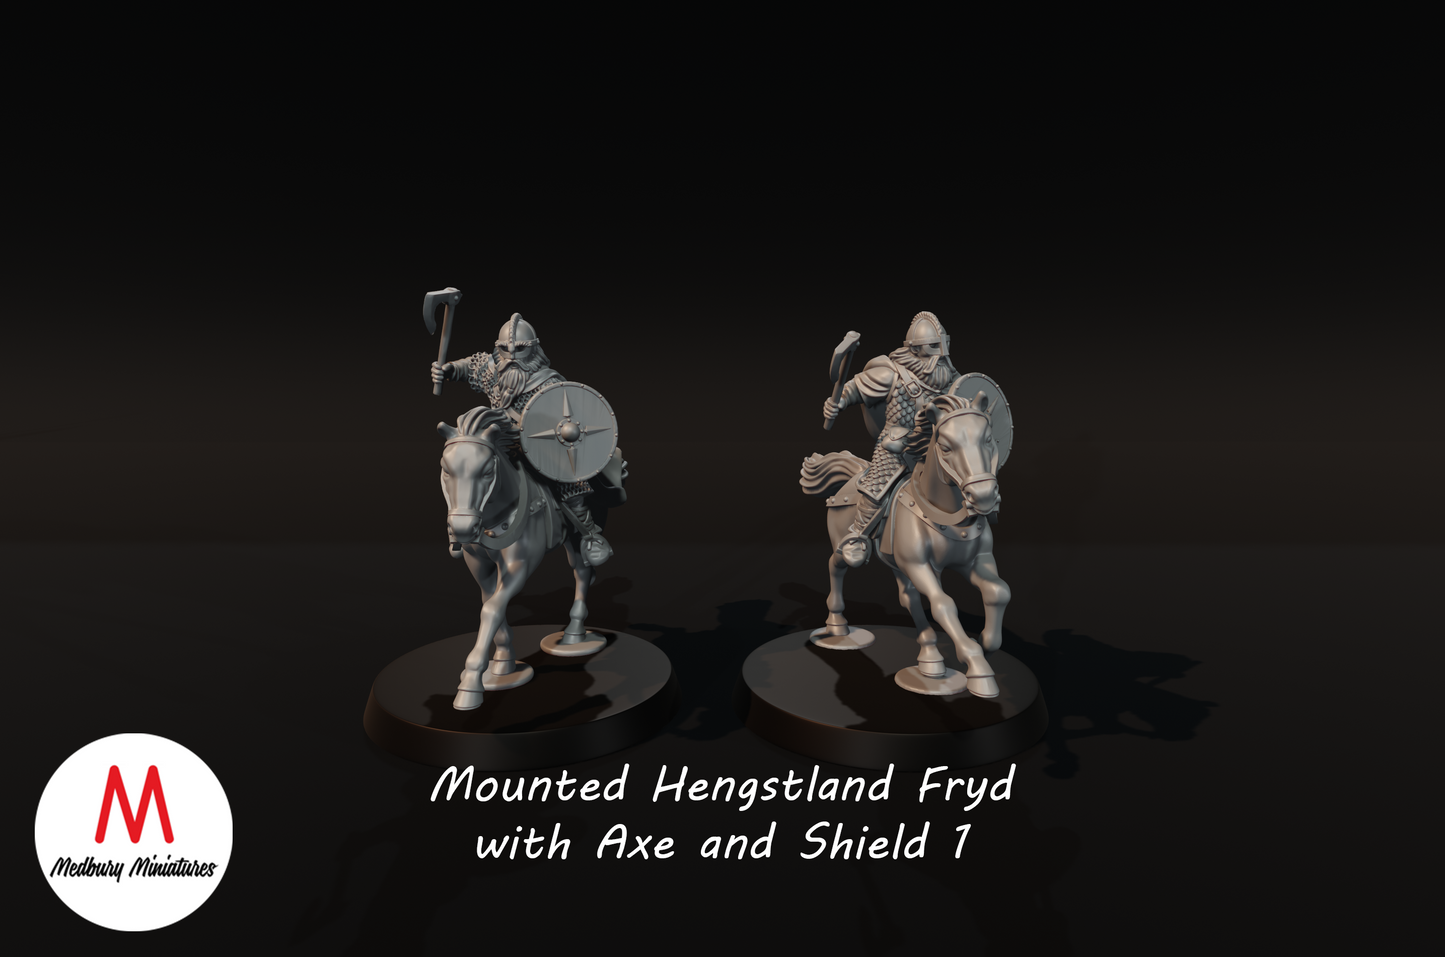 Mounted Hengstland Fryd with ax and shield 1